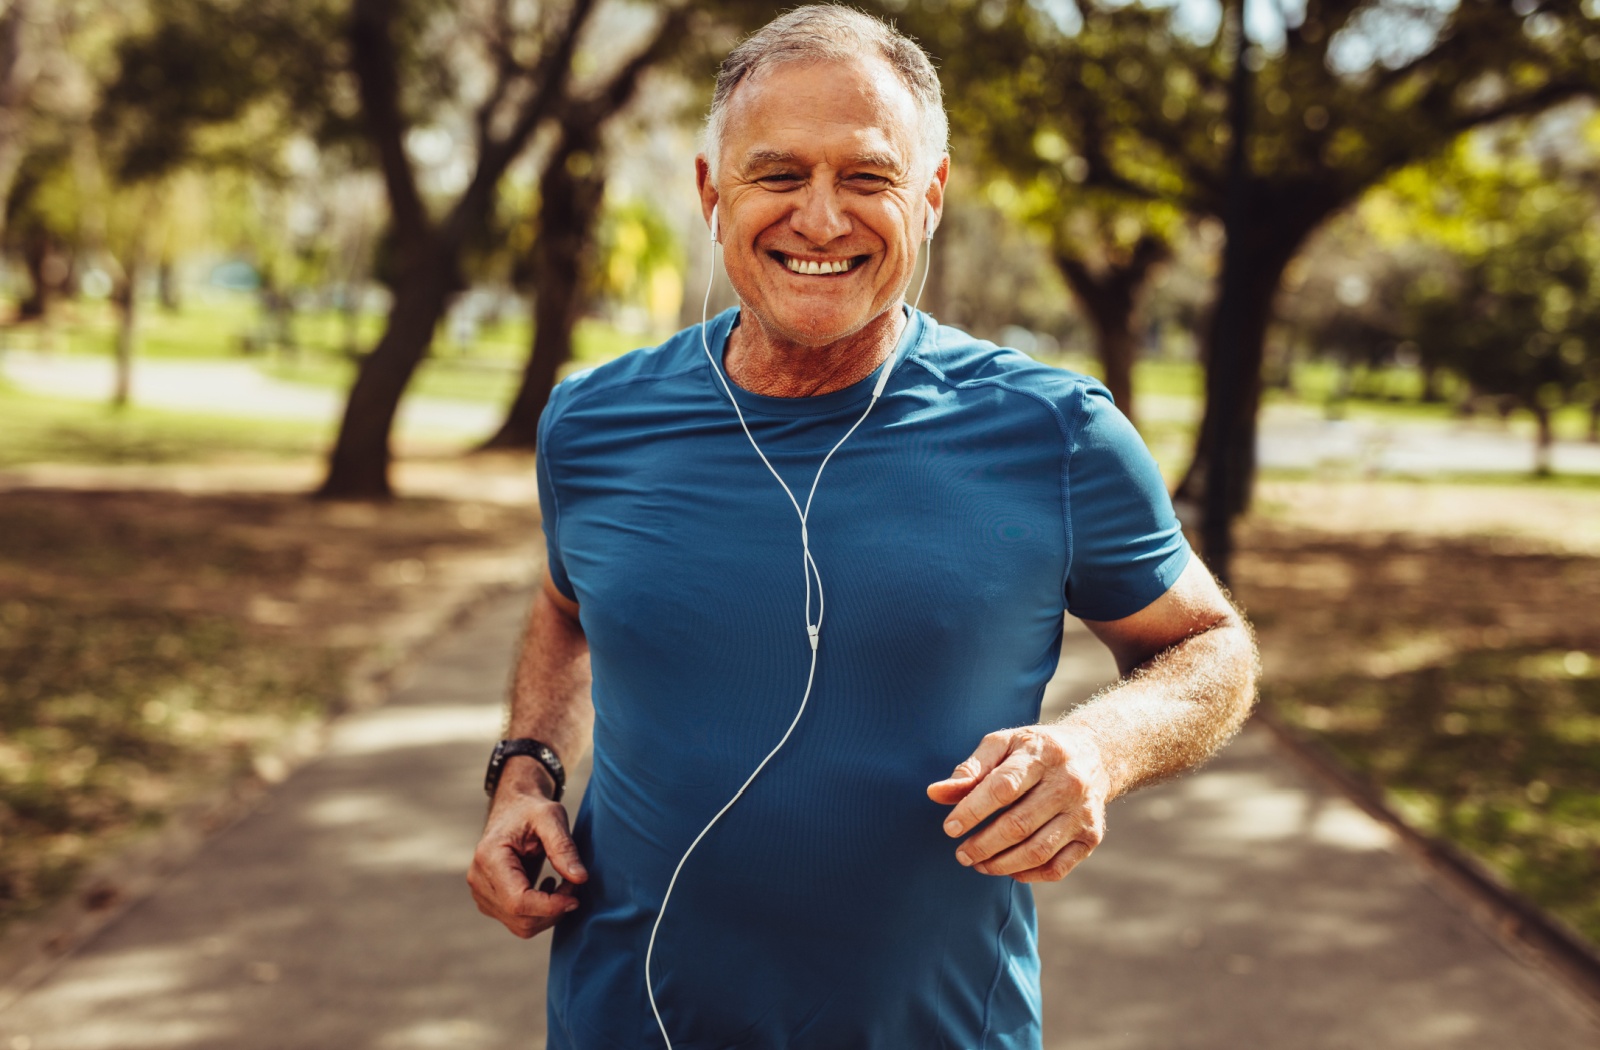 An older adult man jogging outside while listening to music.